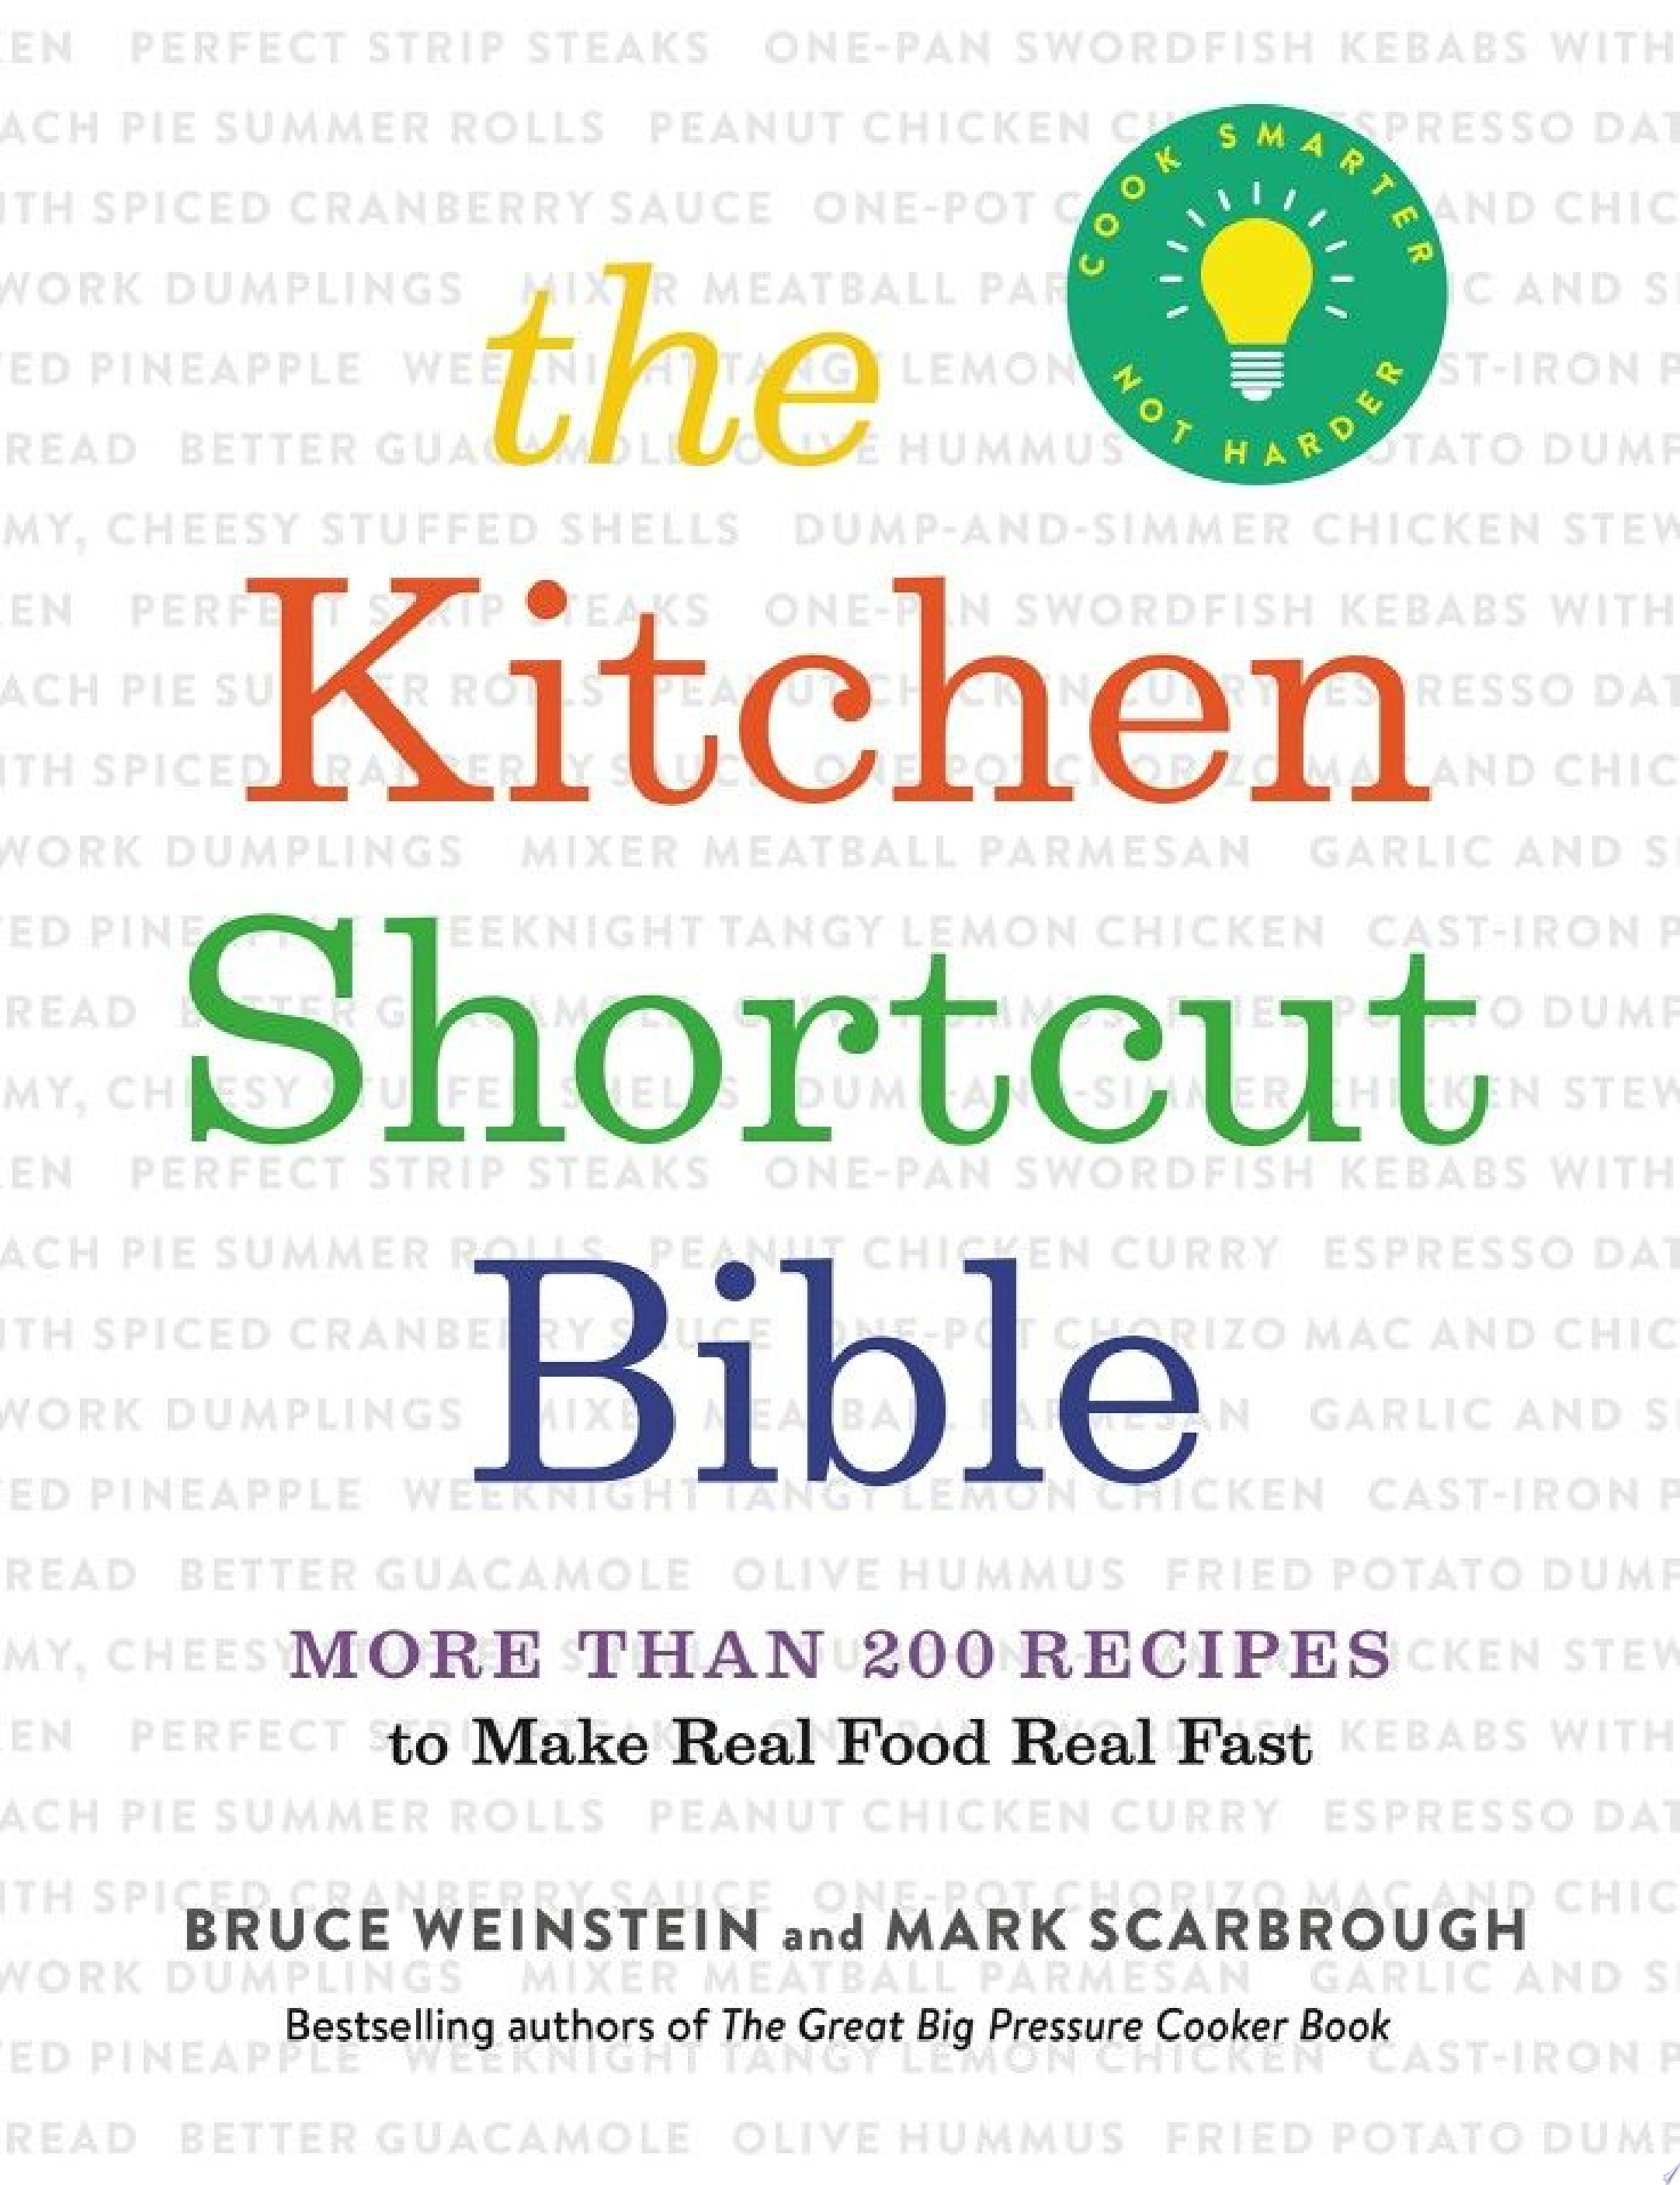 Image for "The Kitchen Shortcut Bible"